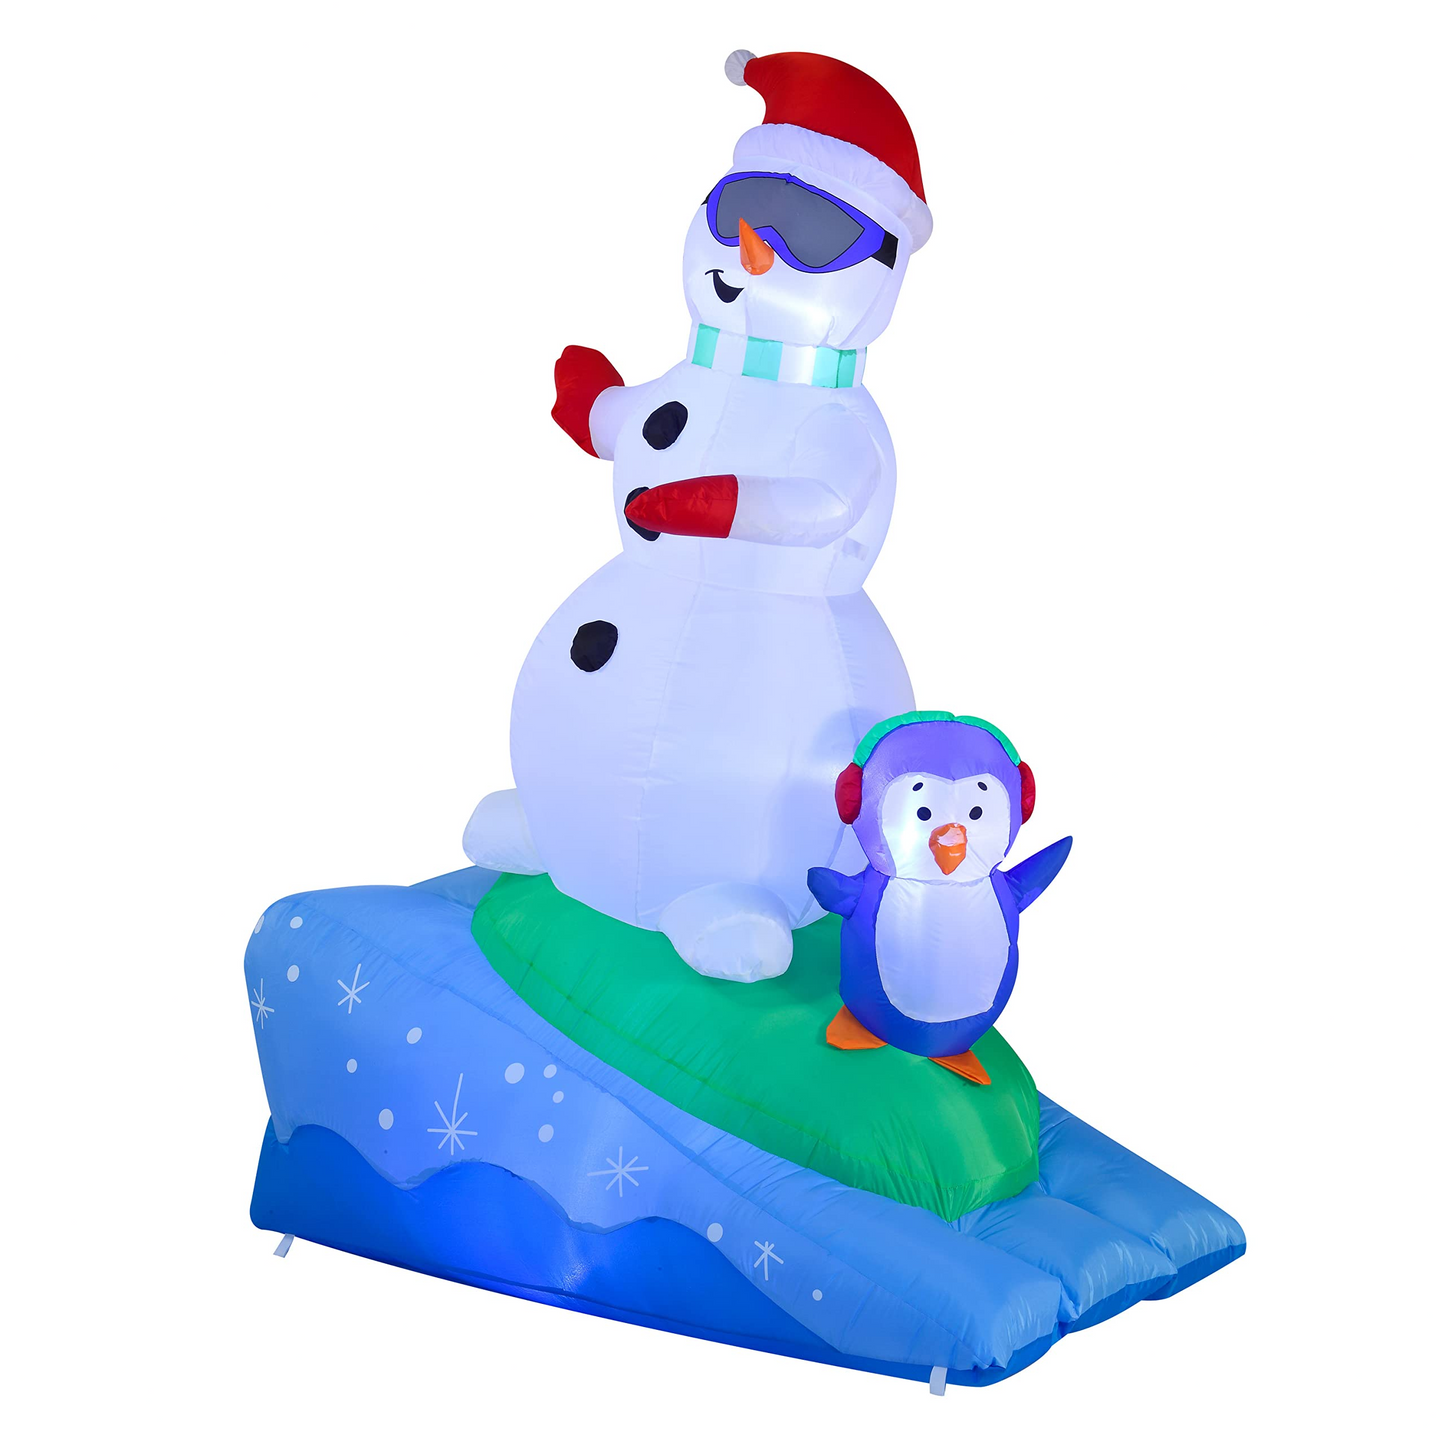 6ft Snowboarding Snowman with A Penguin Inflatable